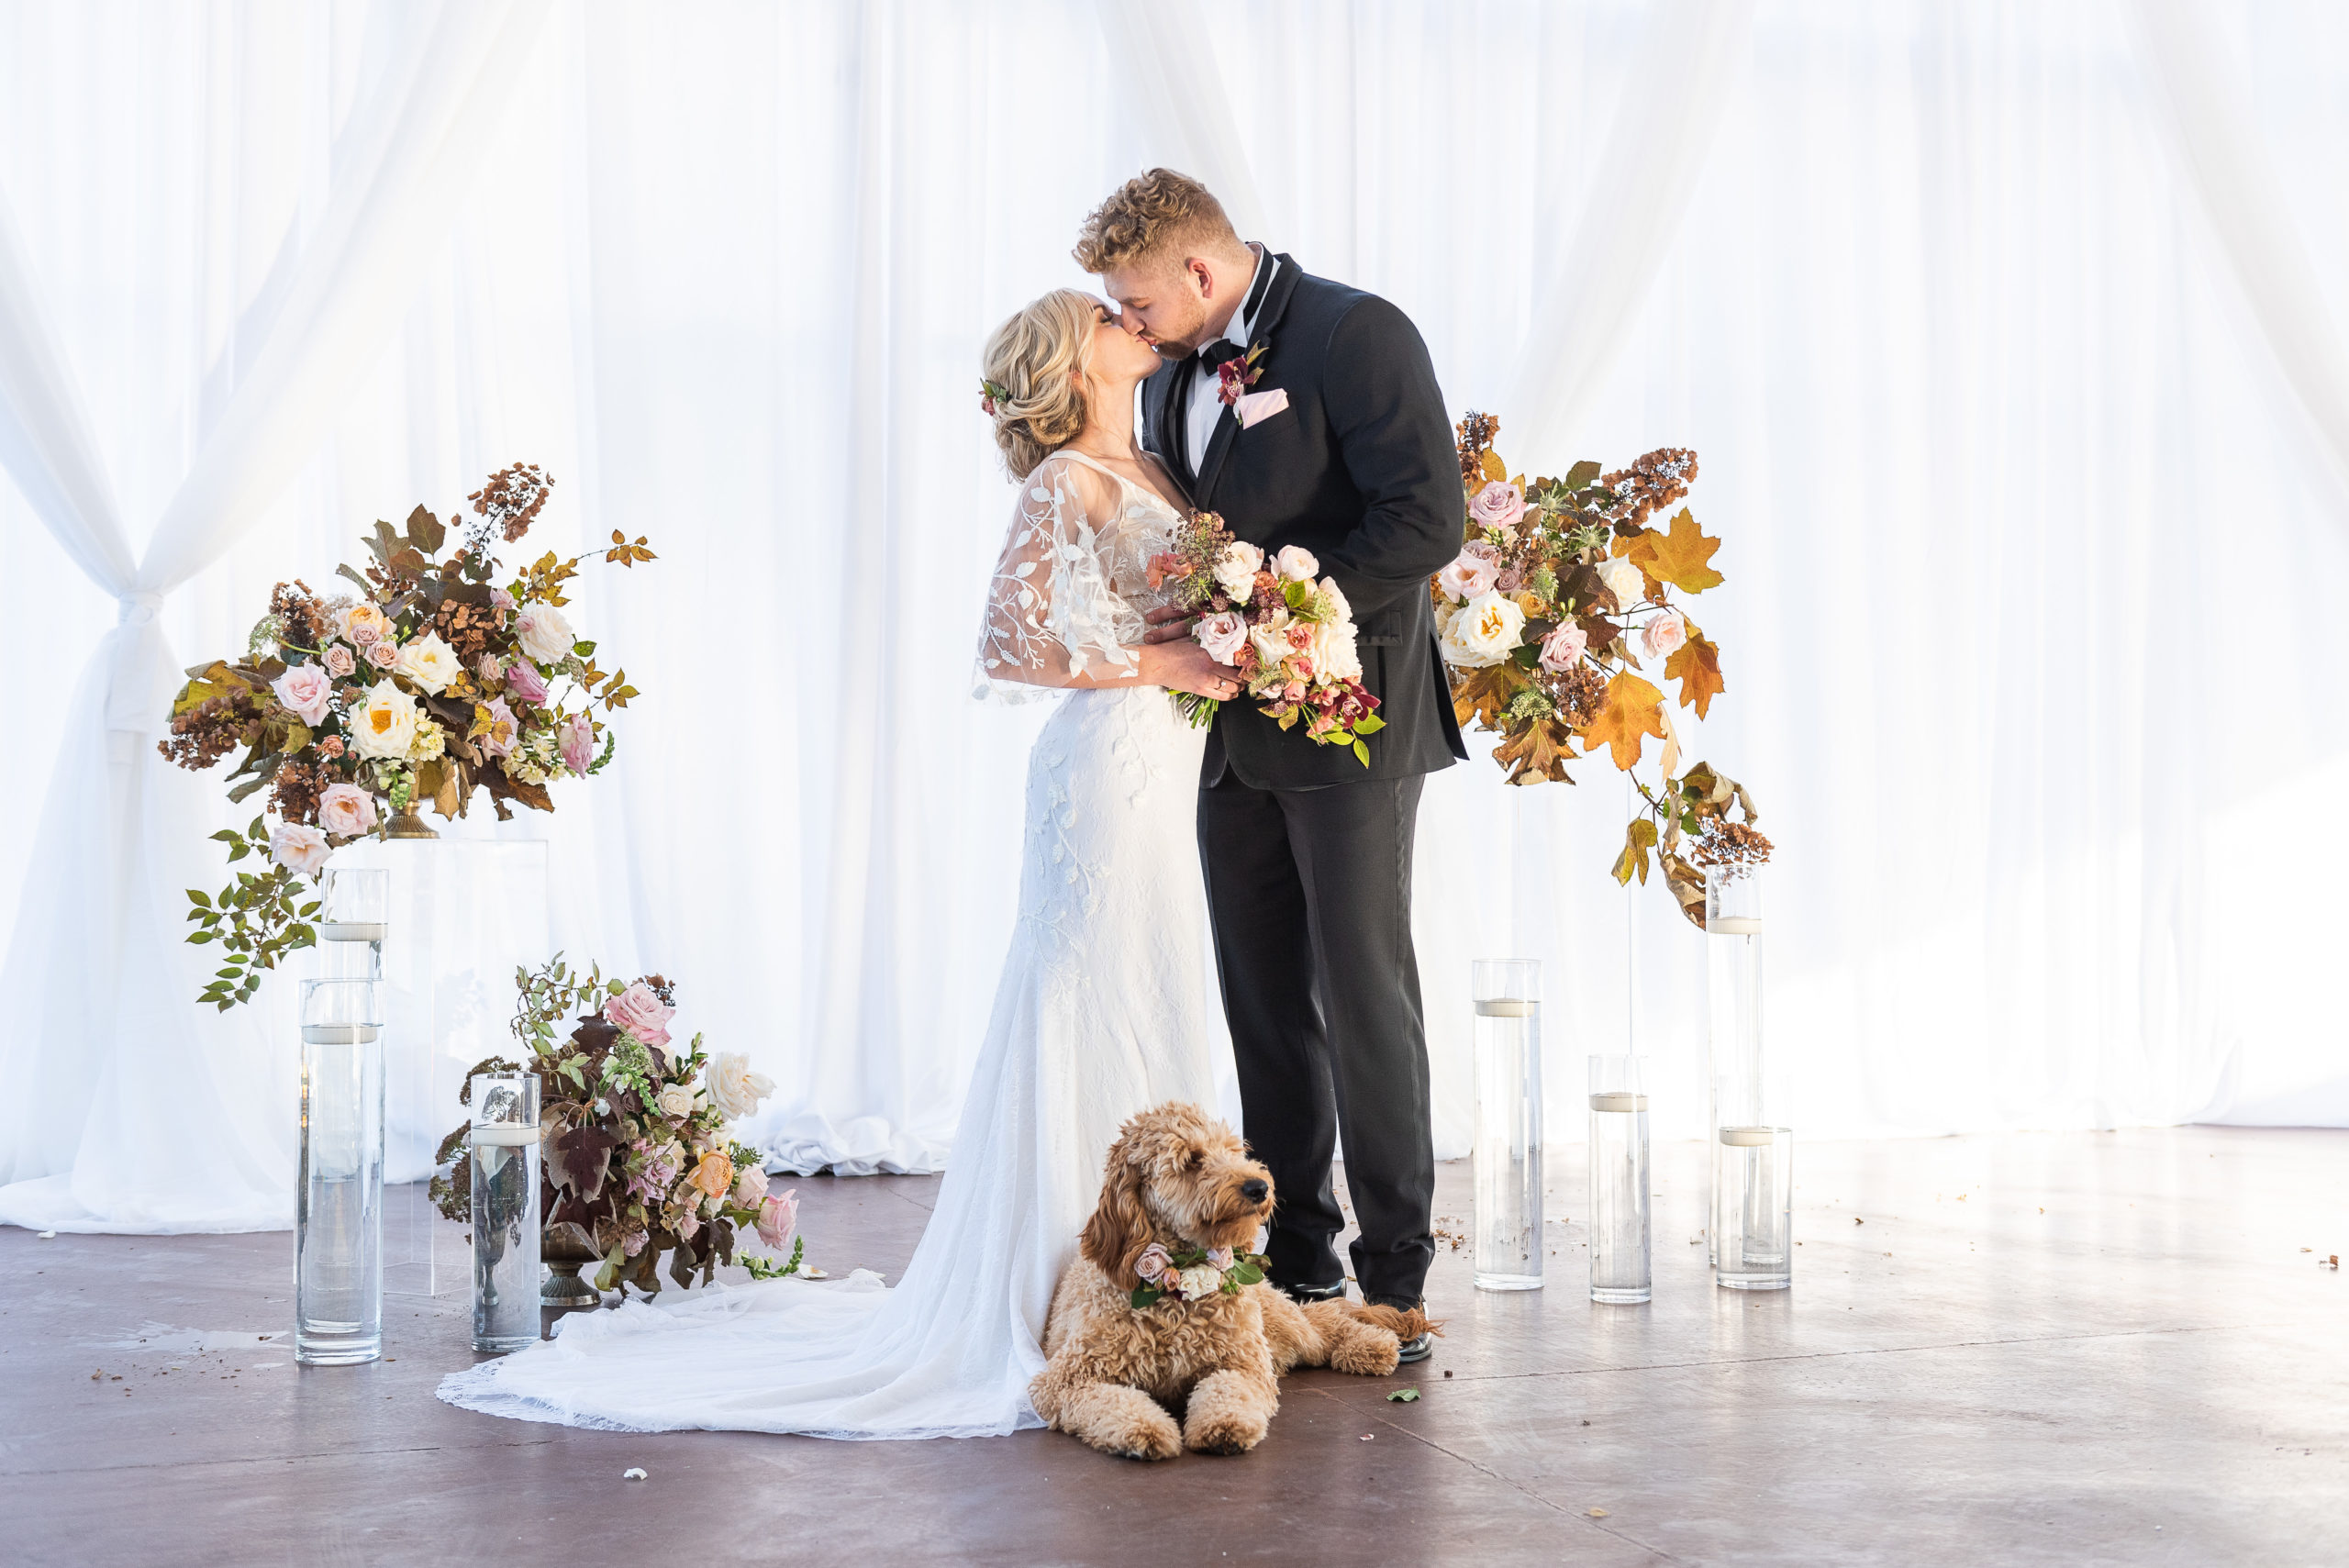 Bride and Groom kissing with a puppy at their feet at the Ritz Charles Garden Pavilion